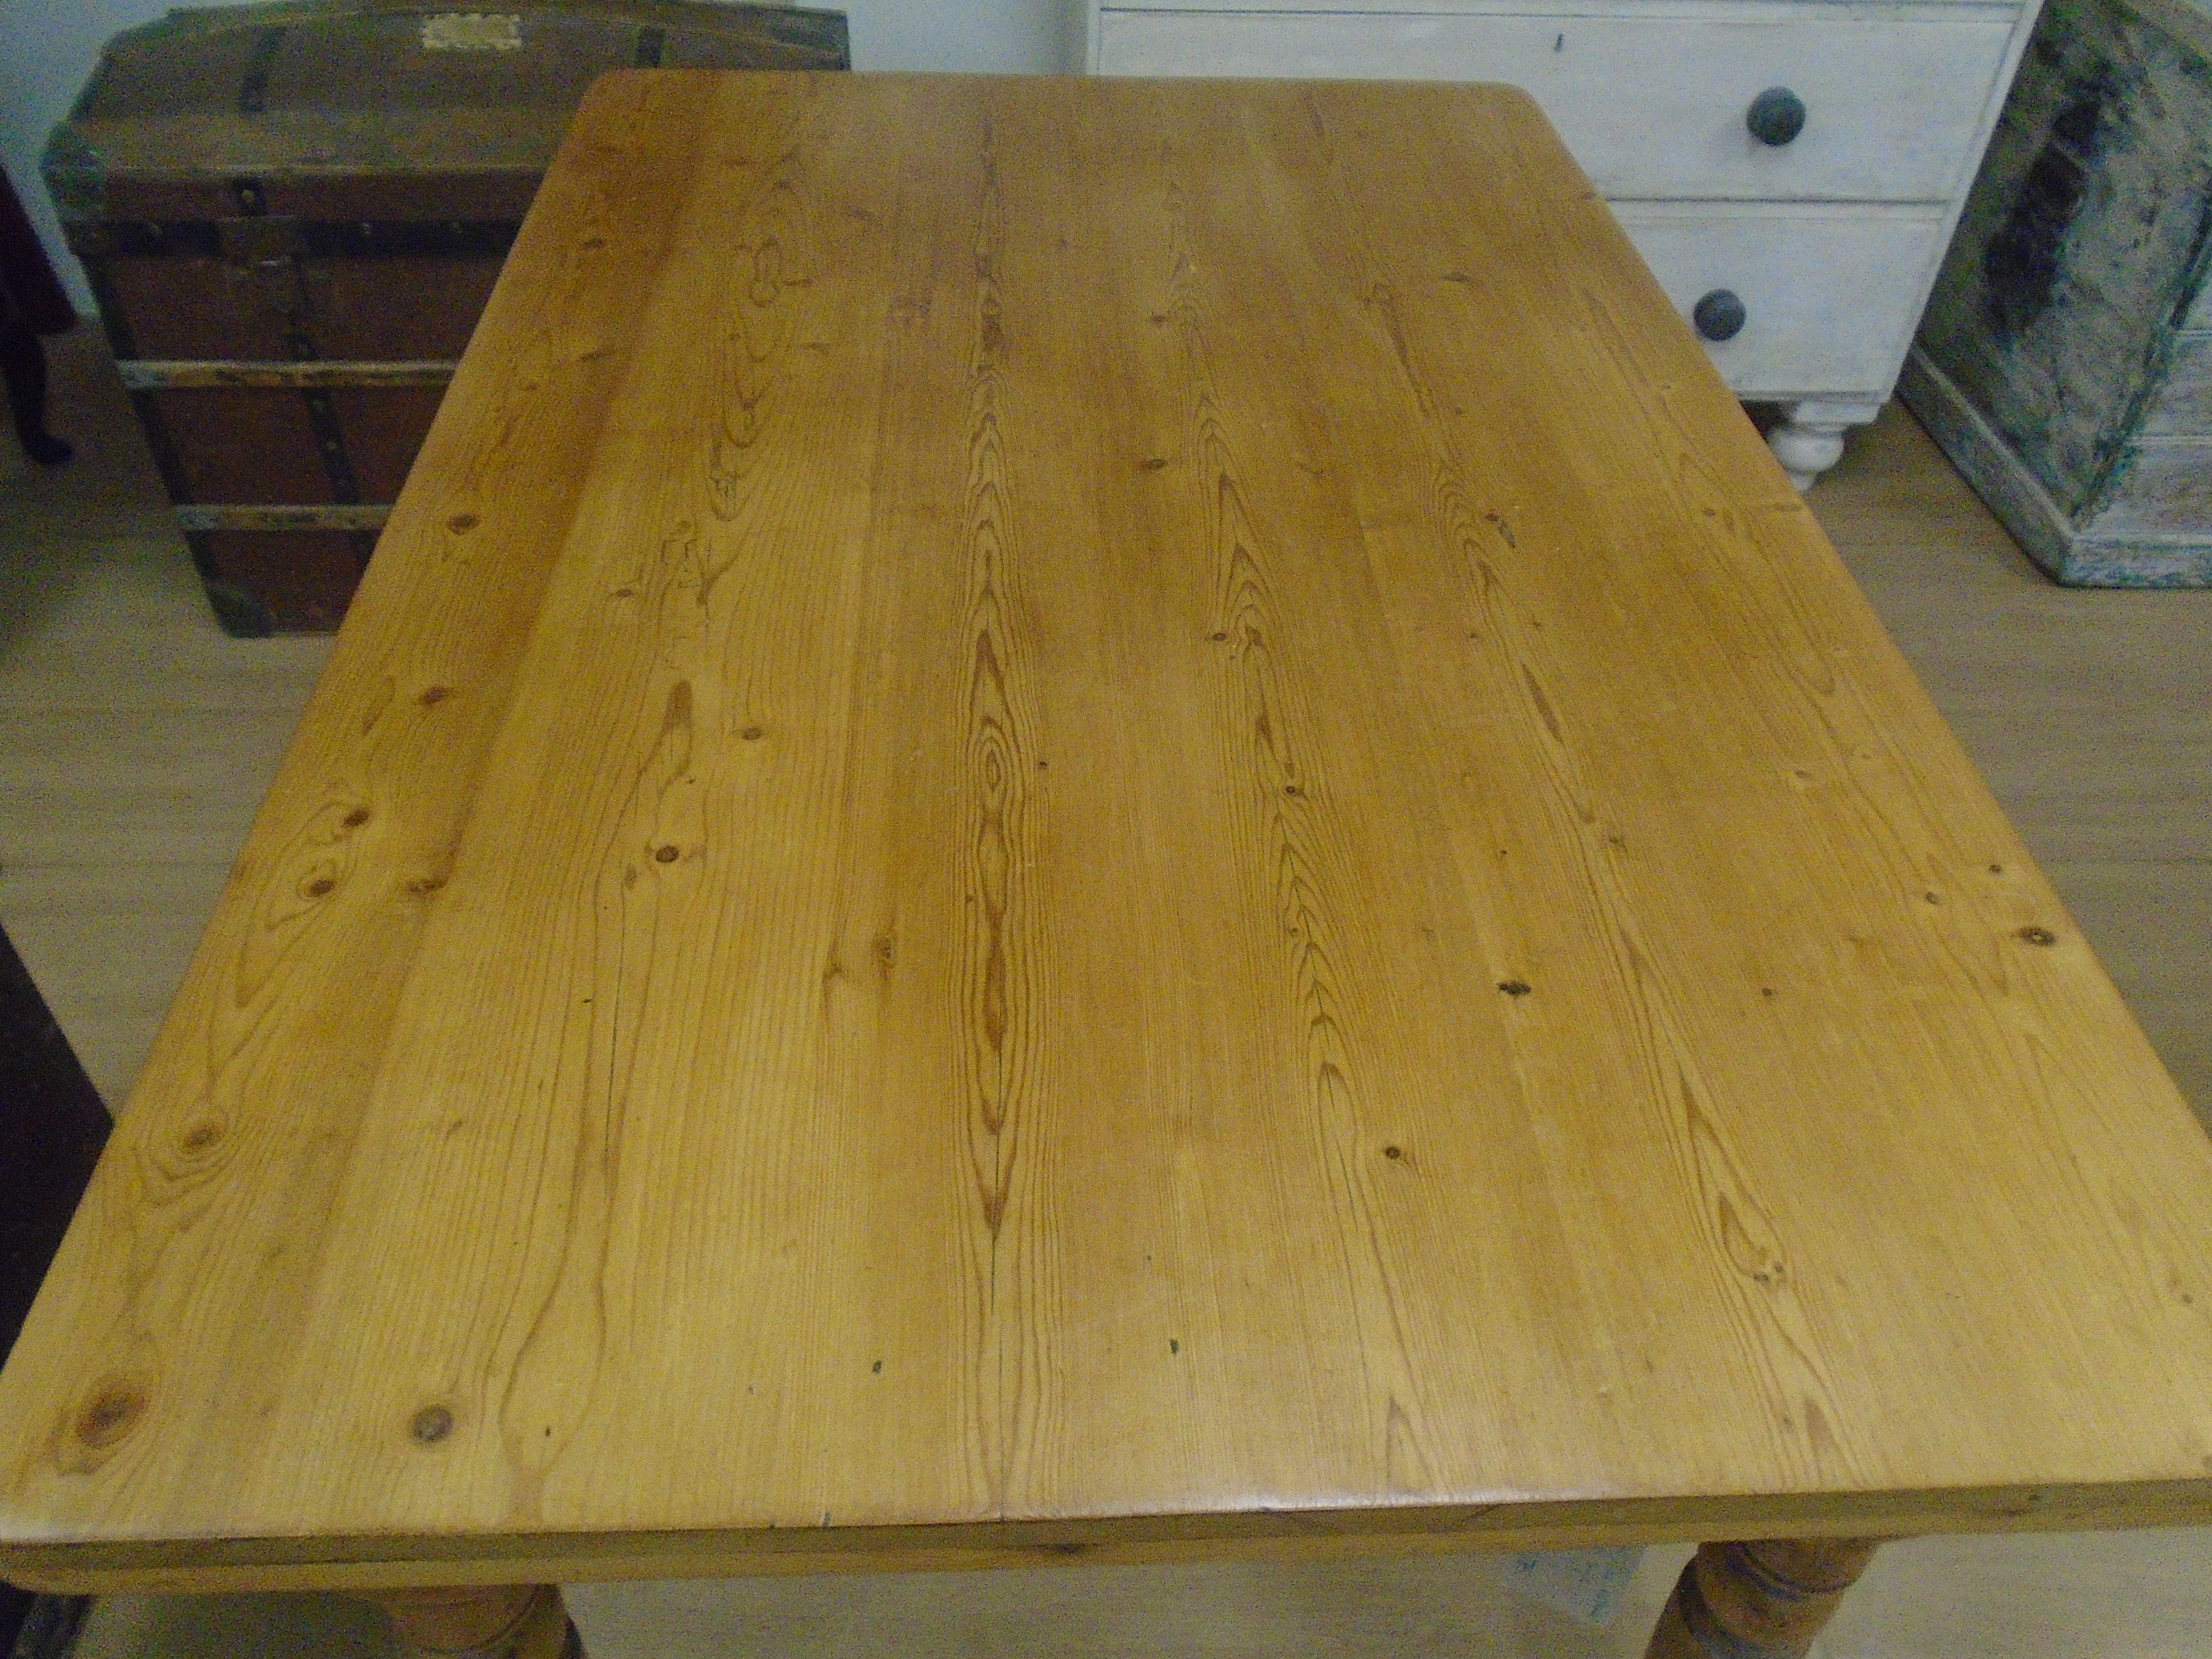 sand pine kitchen table to antique it